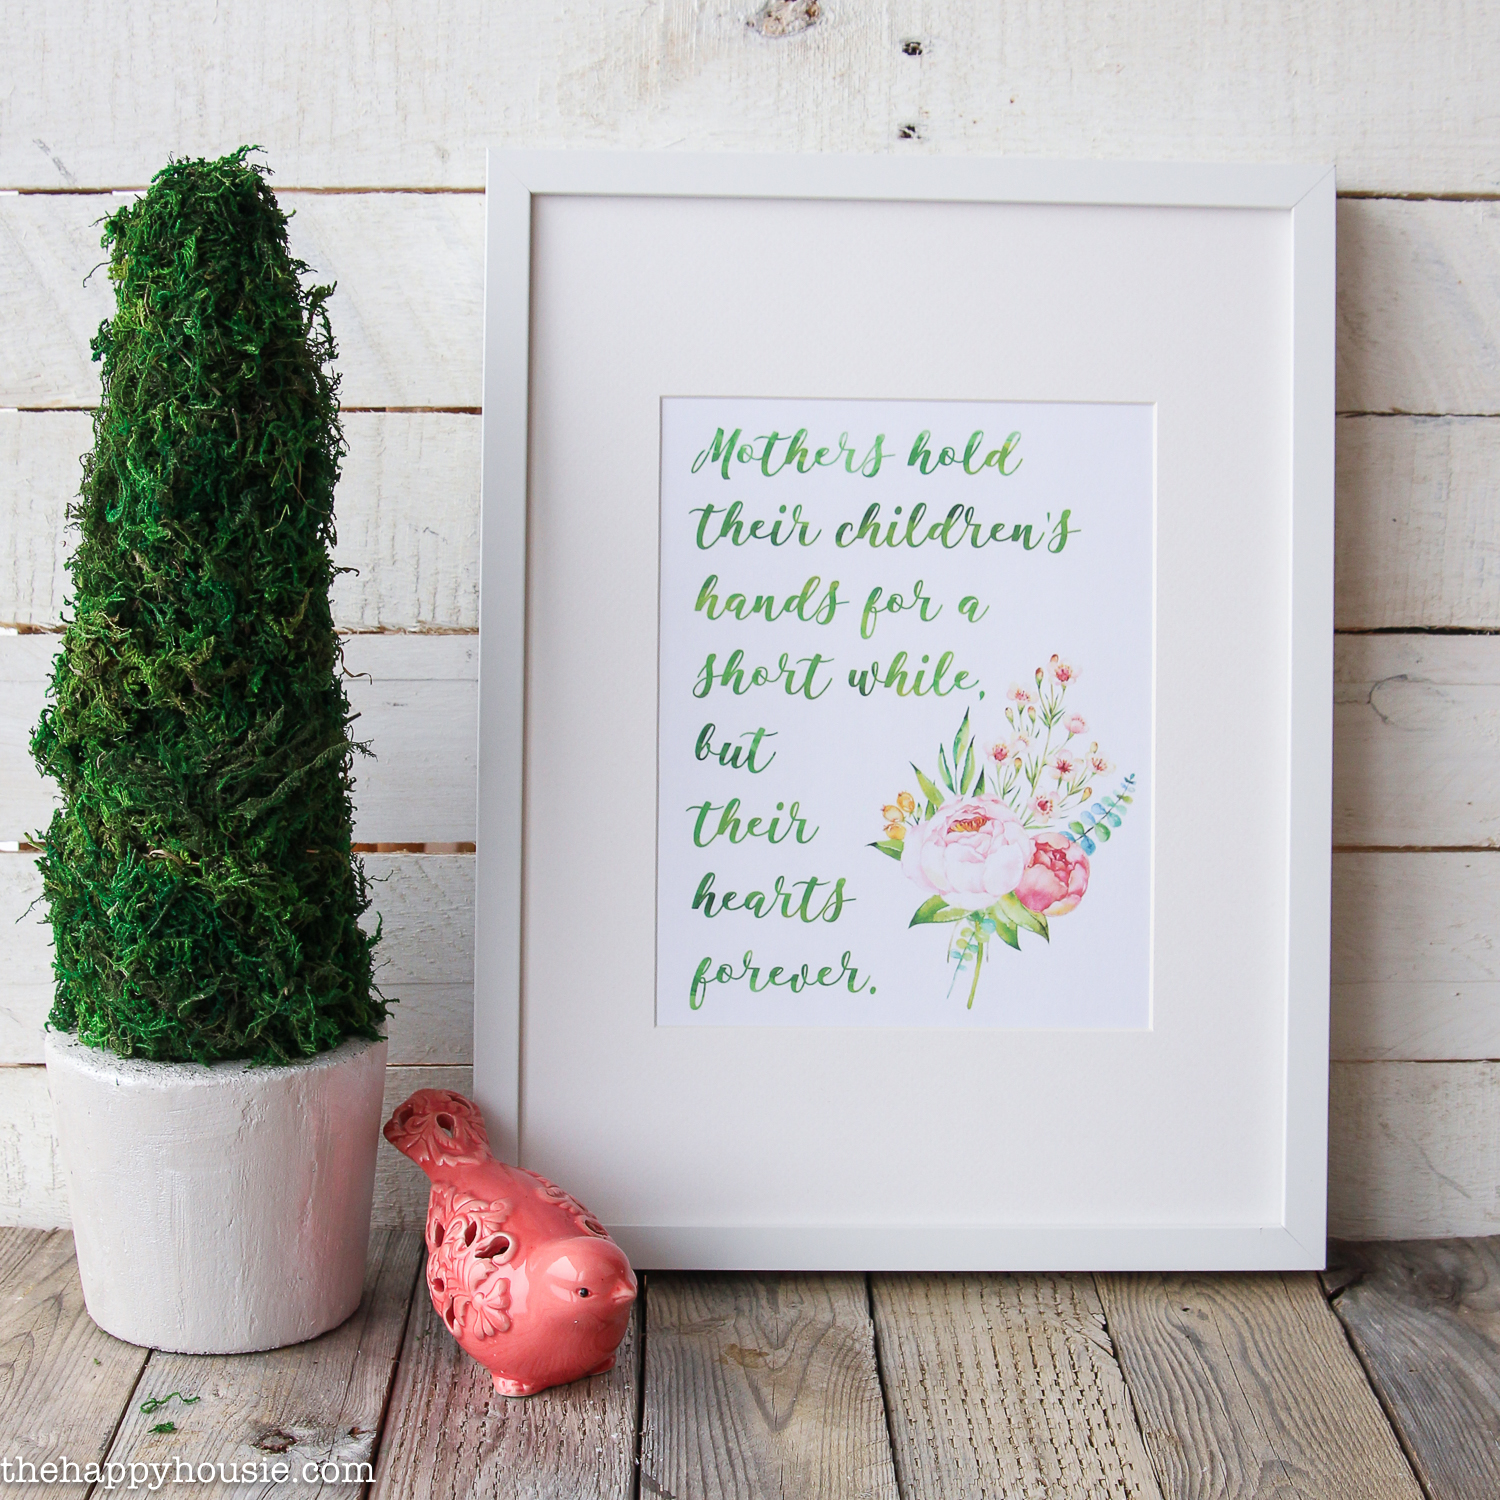 A Mother's Day quote framed in white.